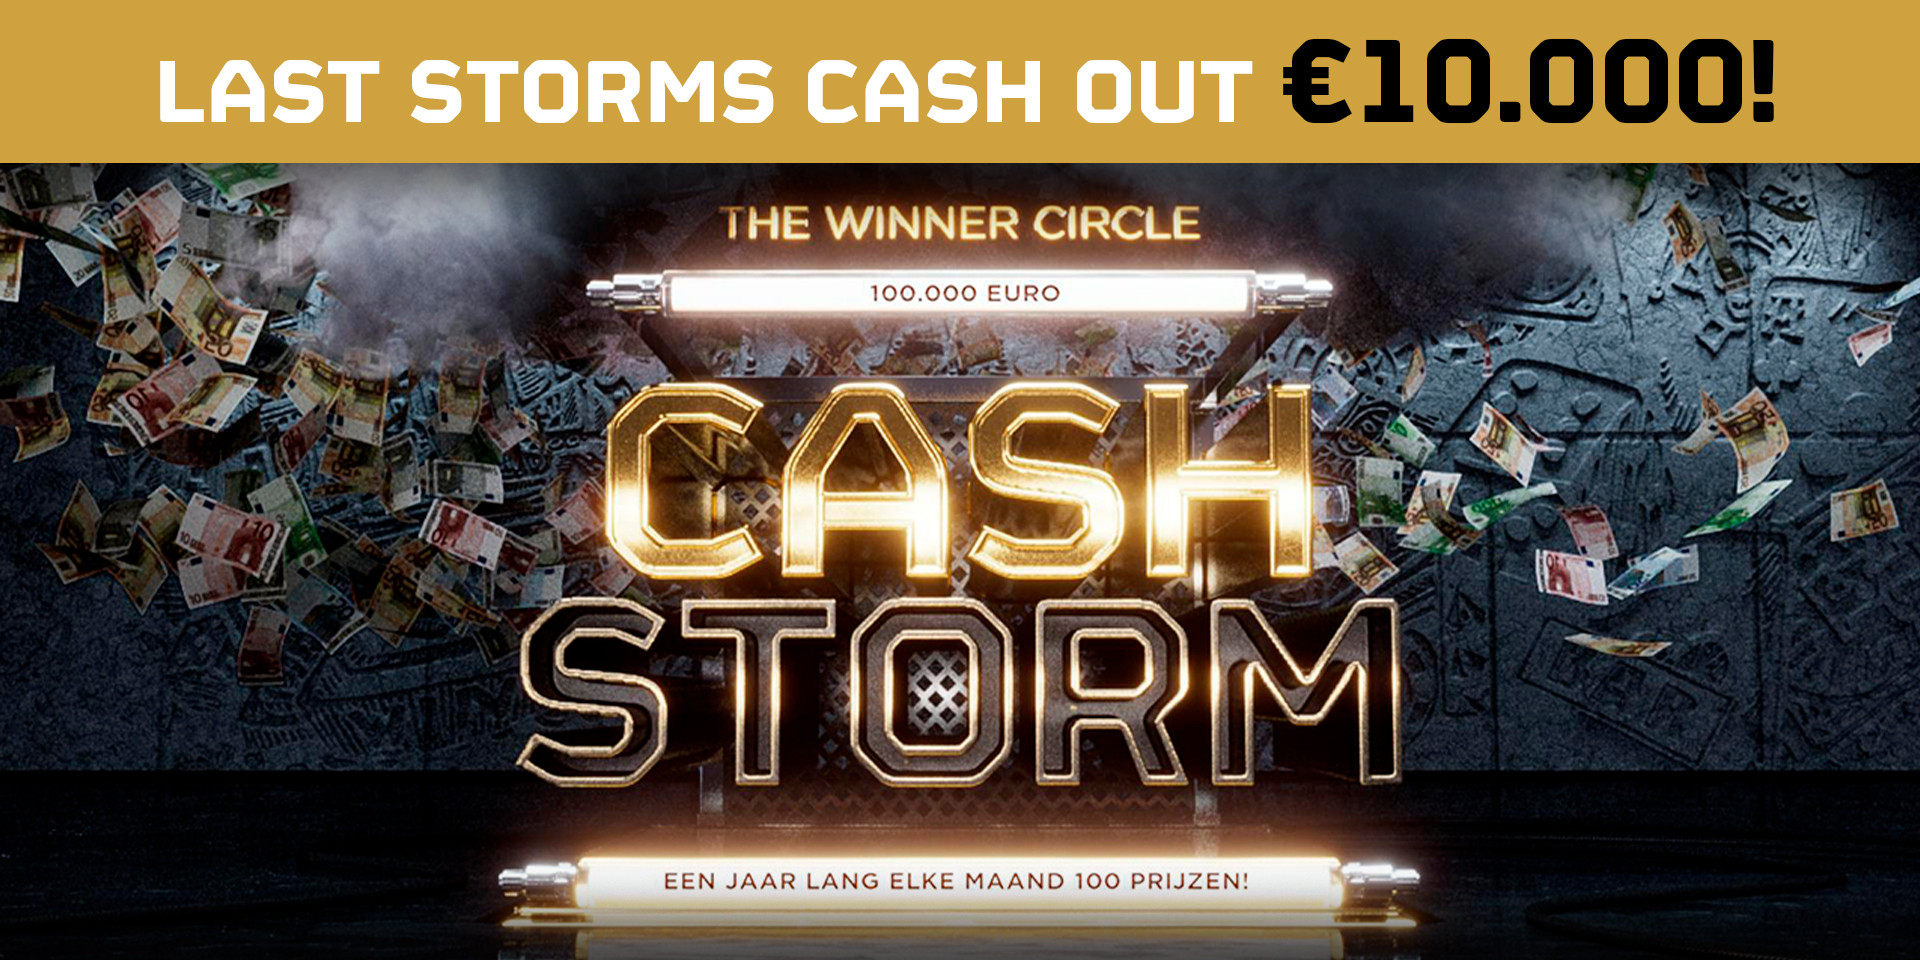 CONGRATS TO ALL CASH STORM WINNERS!